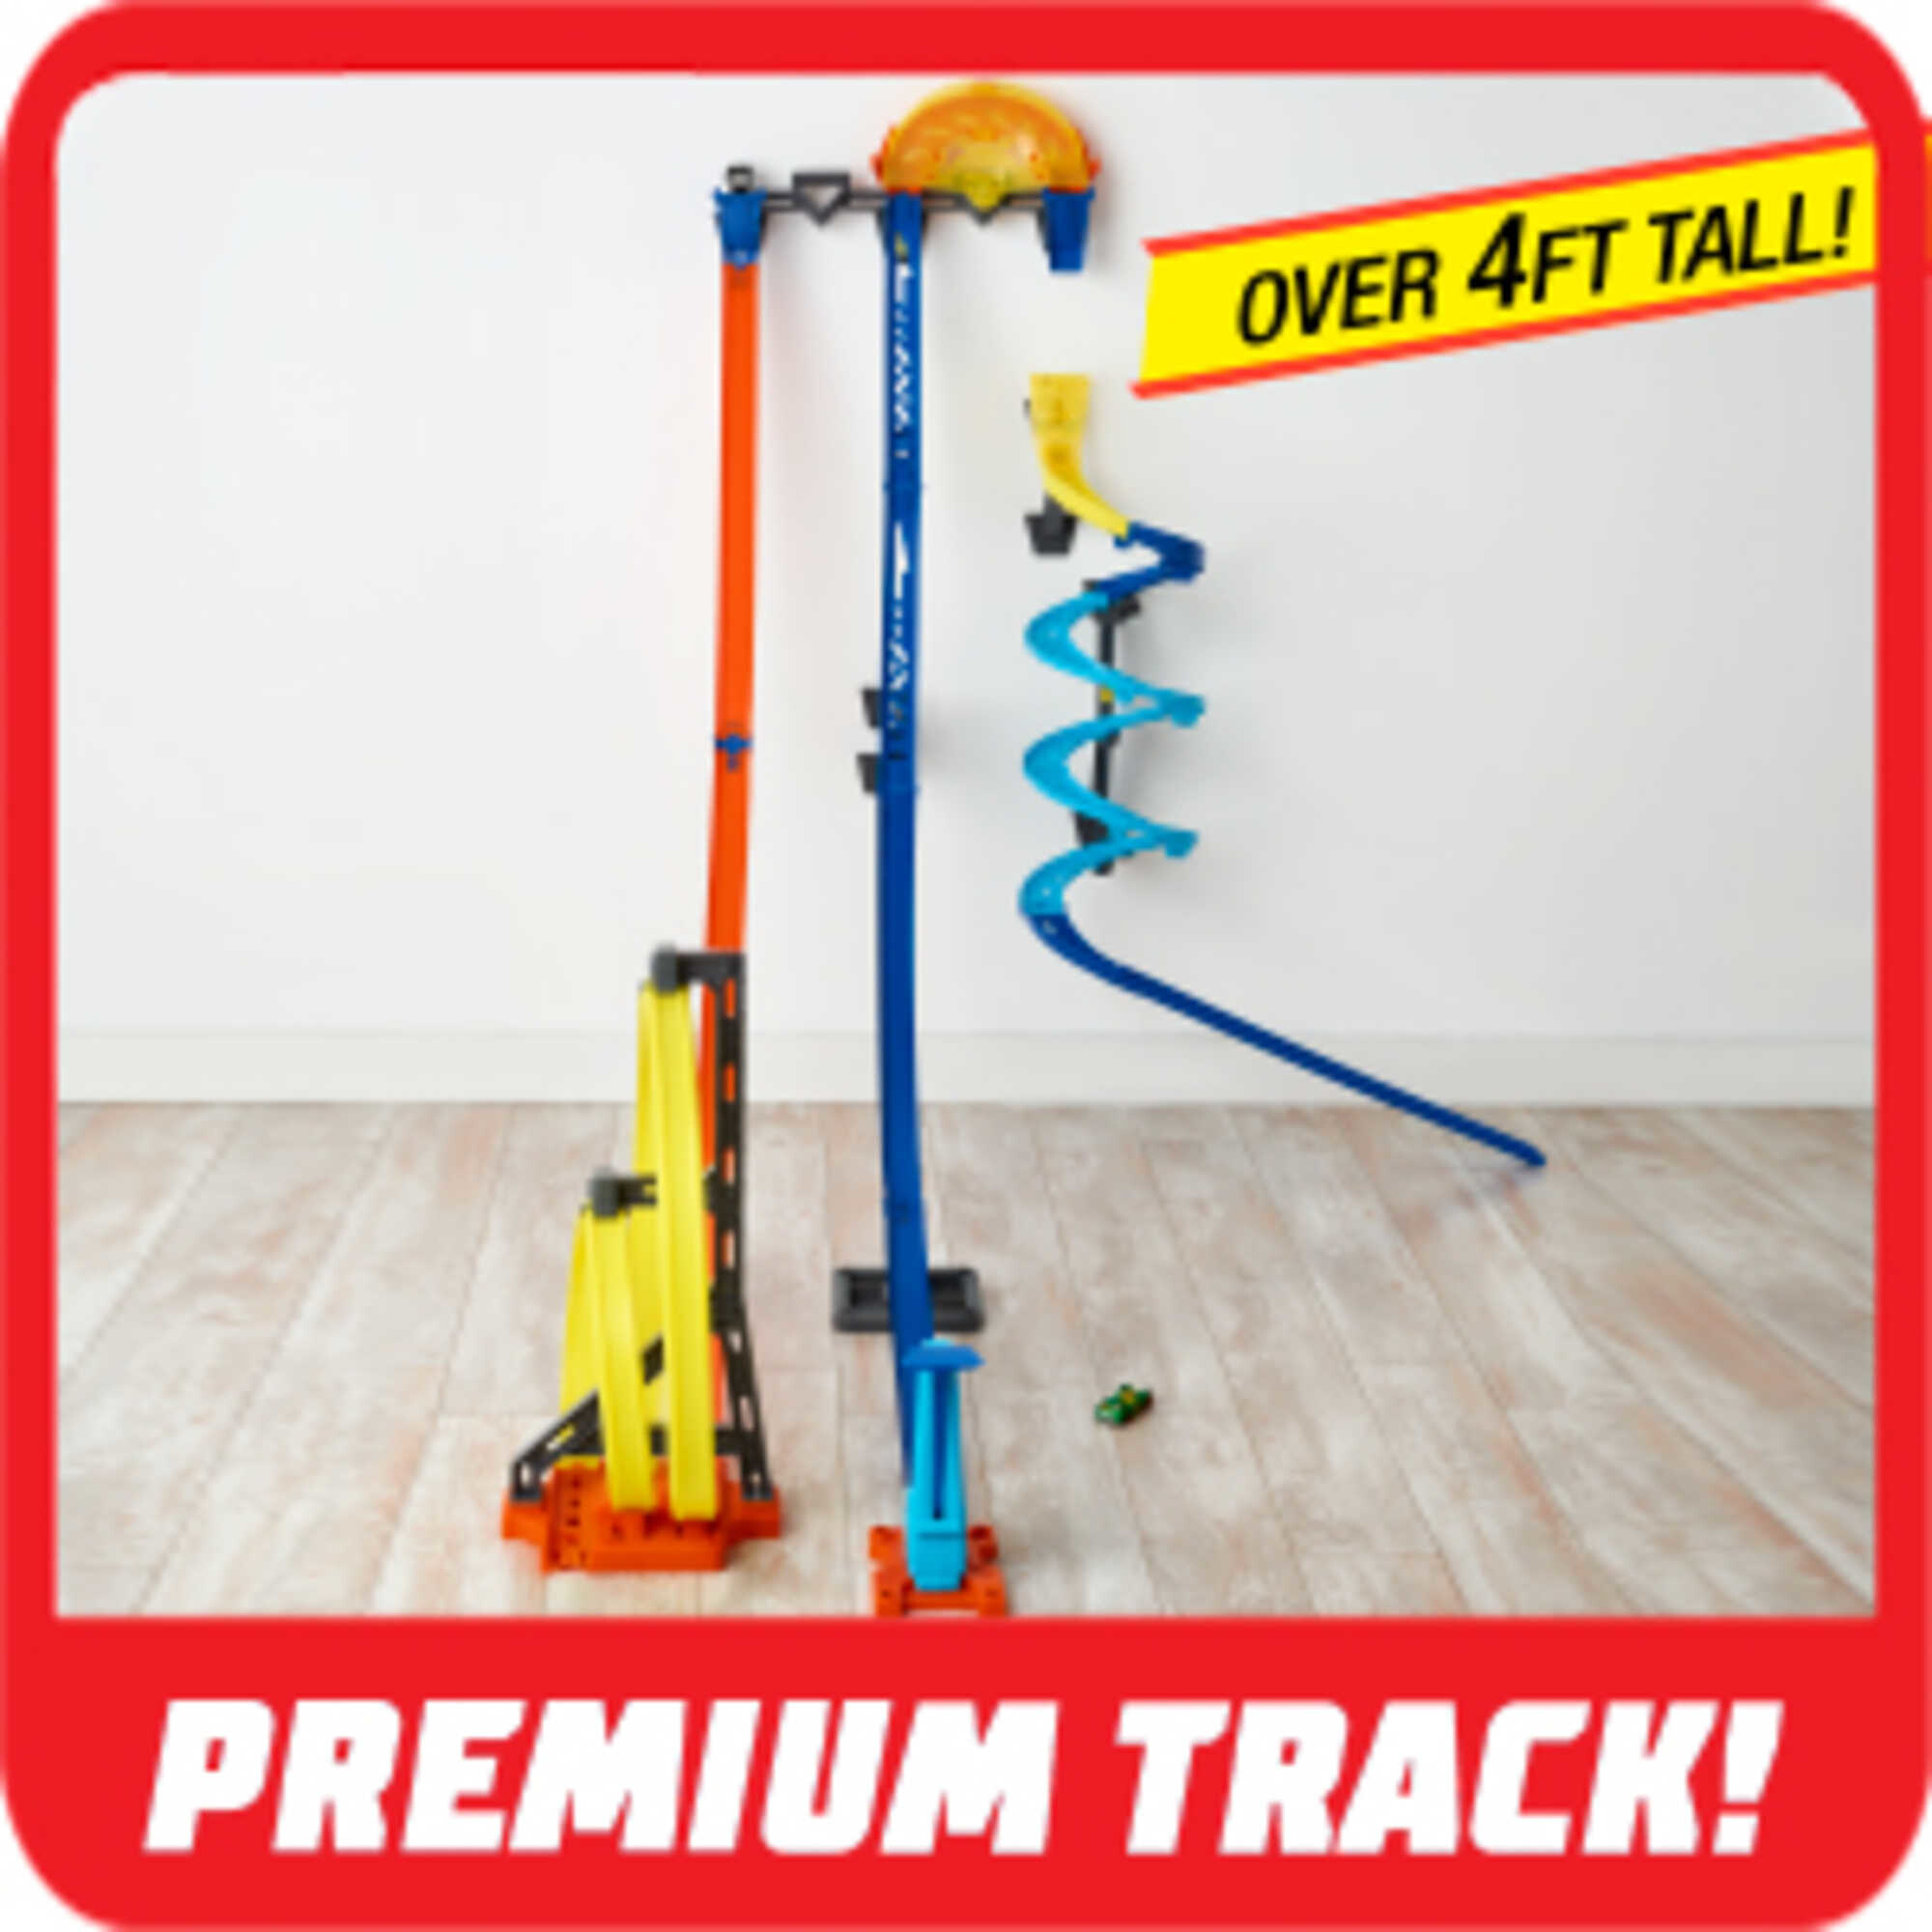 Hot Wheels Track Builder Vertical Launch Kit, 50-in Tall, 3 Configurations & 1 Toy Car - image 3 of 6